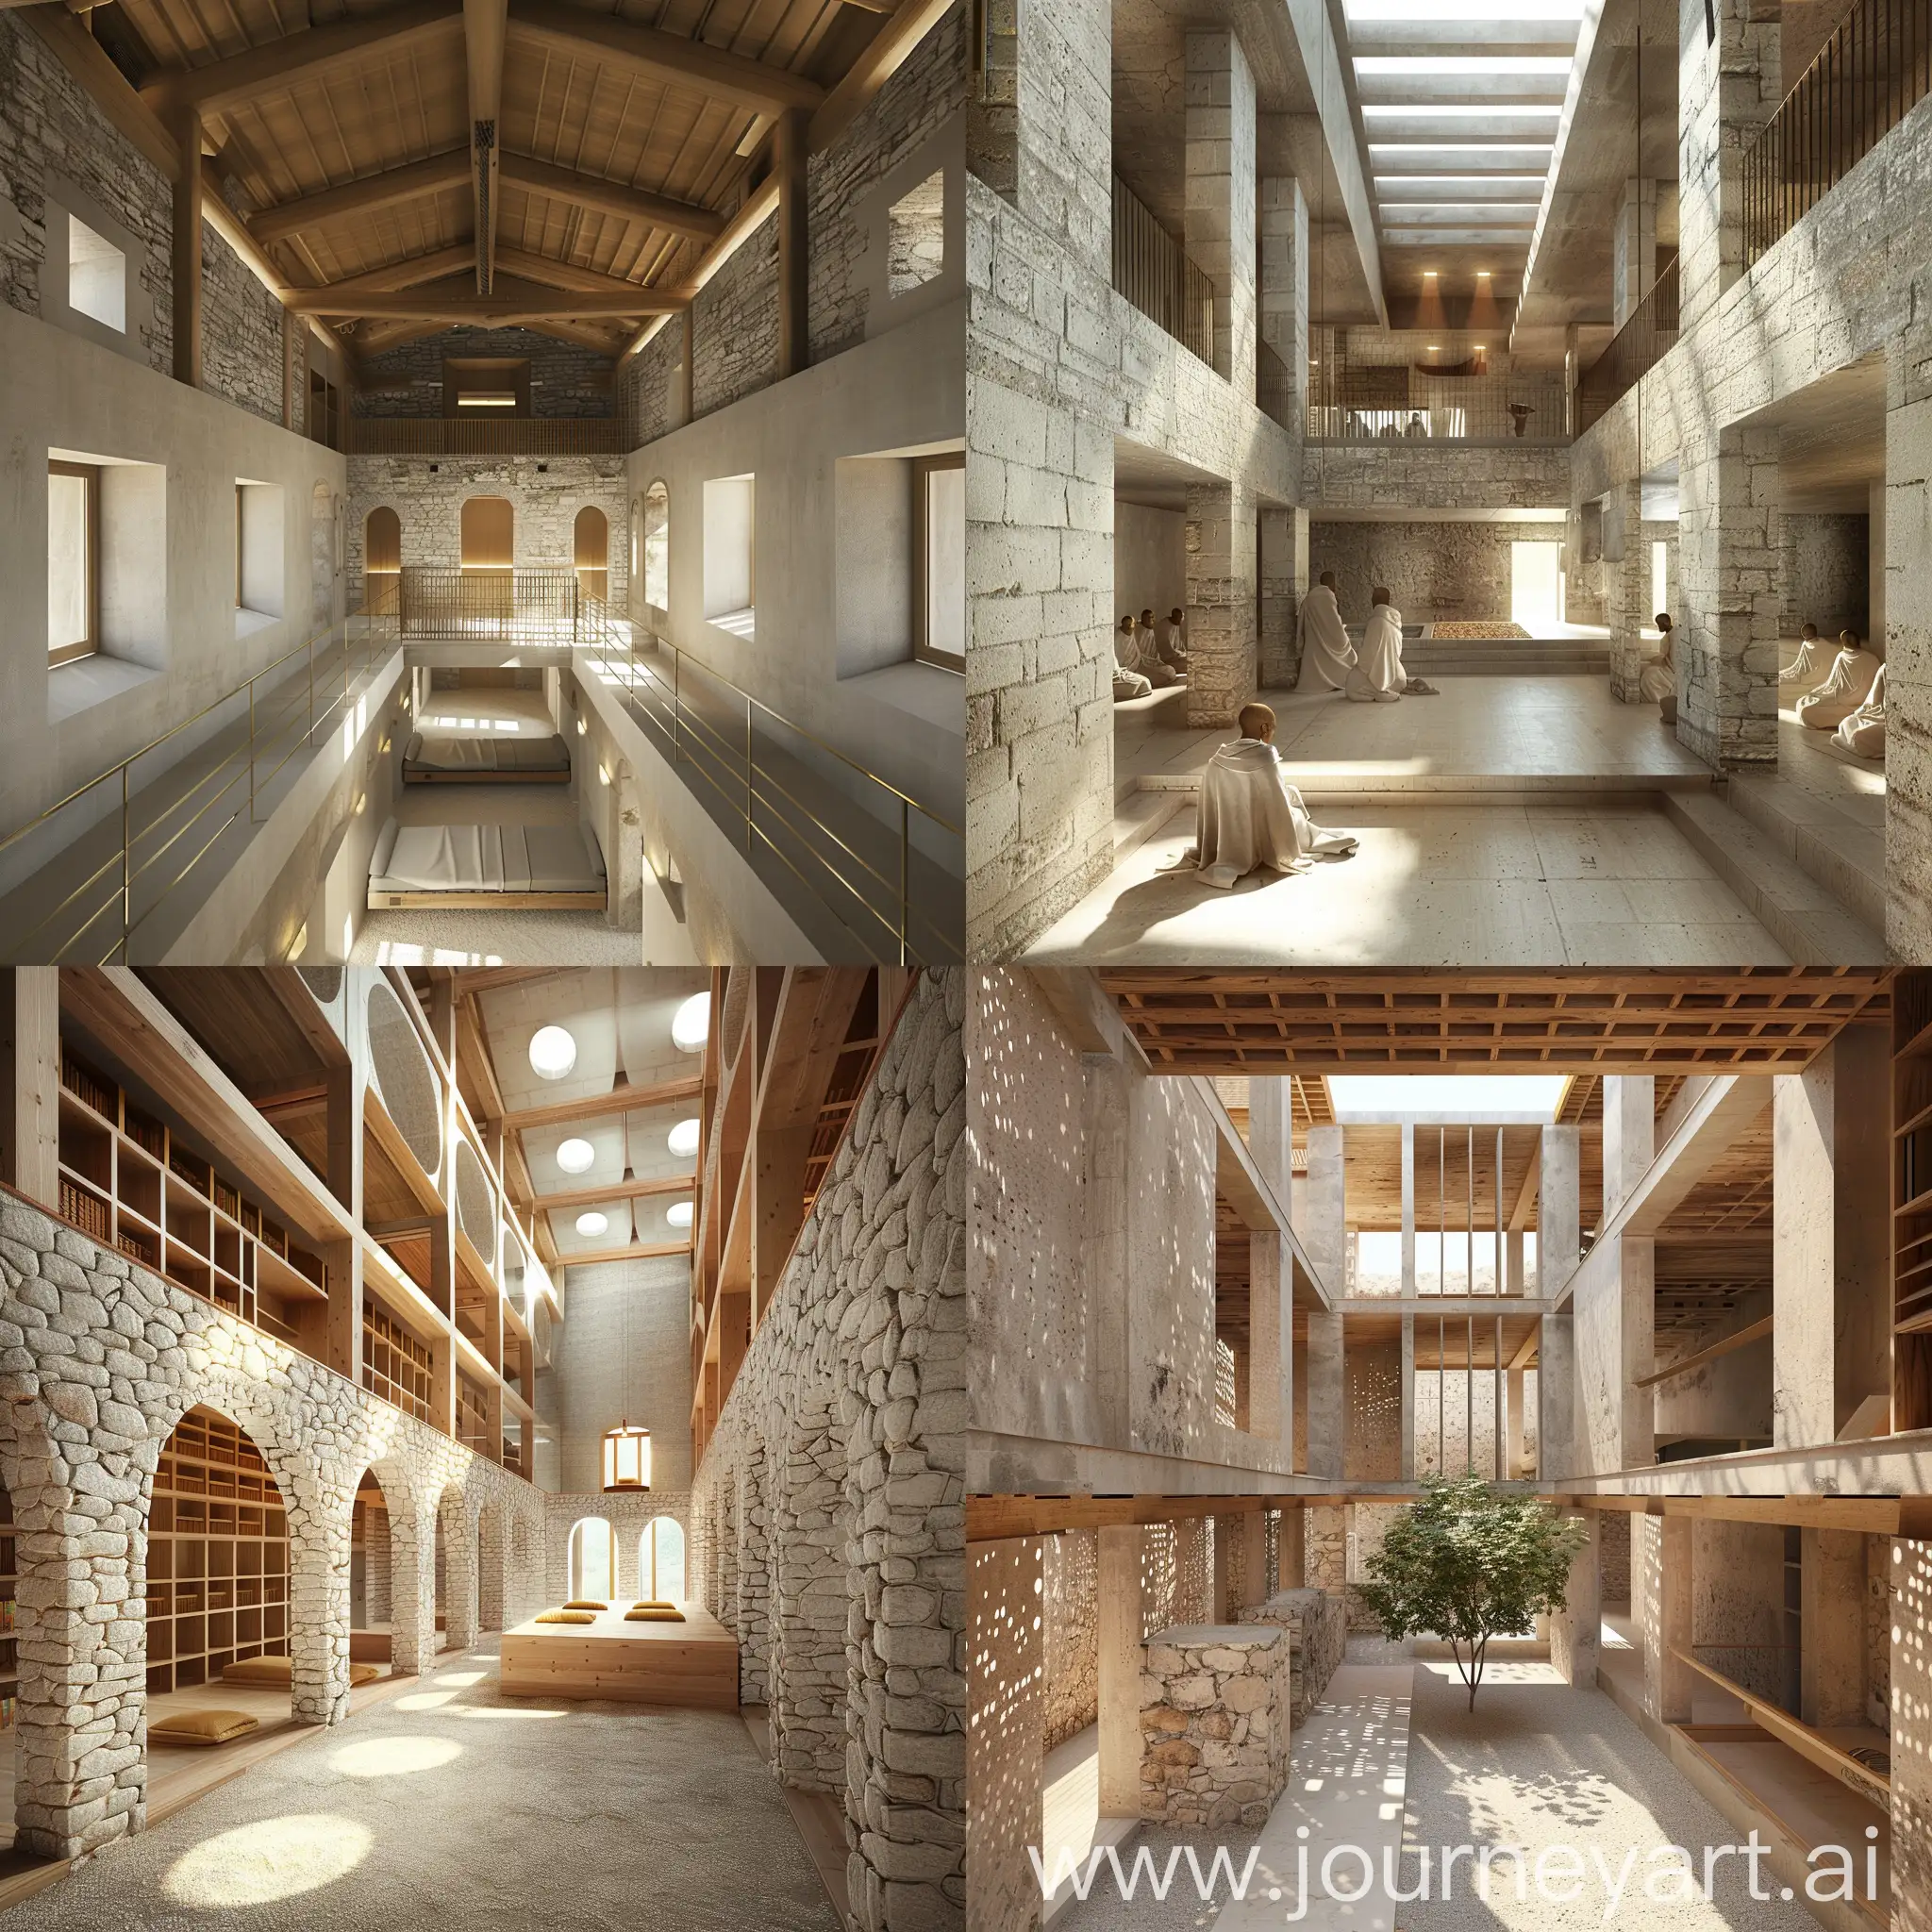 Stone-and-Wood-Monastery-with-Two-Floors-and-Abundant-Light-Openings